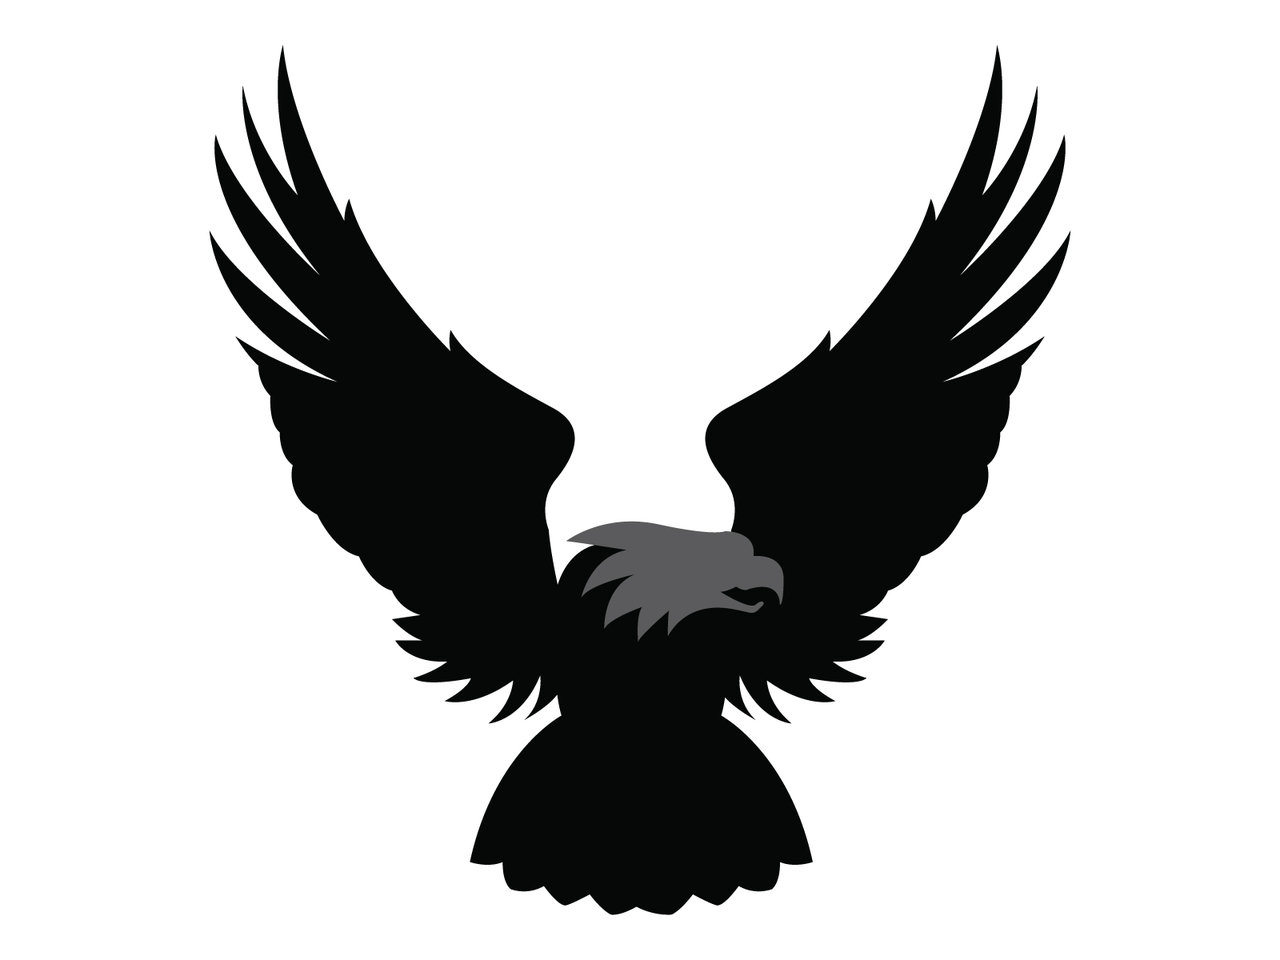 Black Eagle Vector by Imperatore34 on deviantART